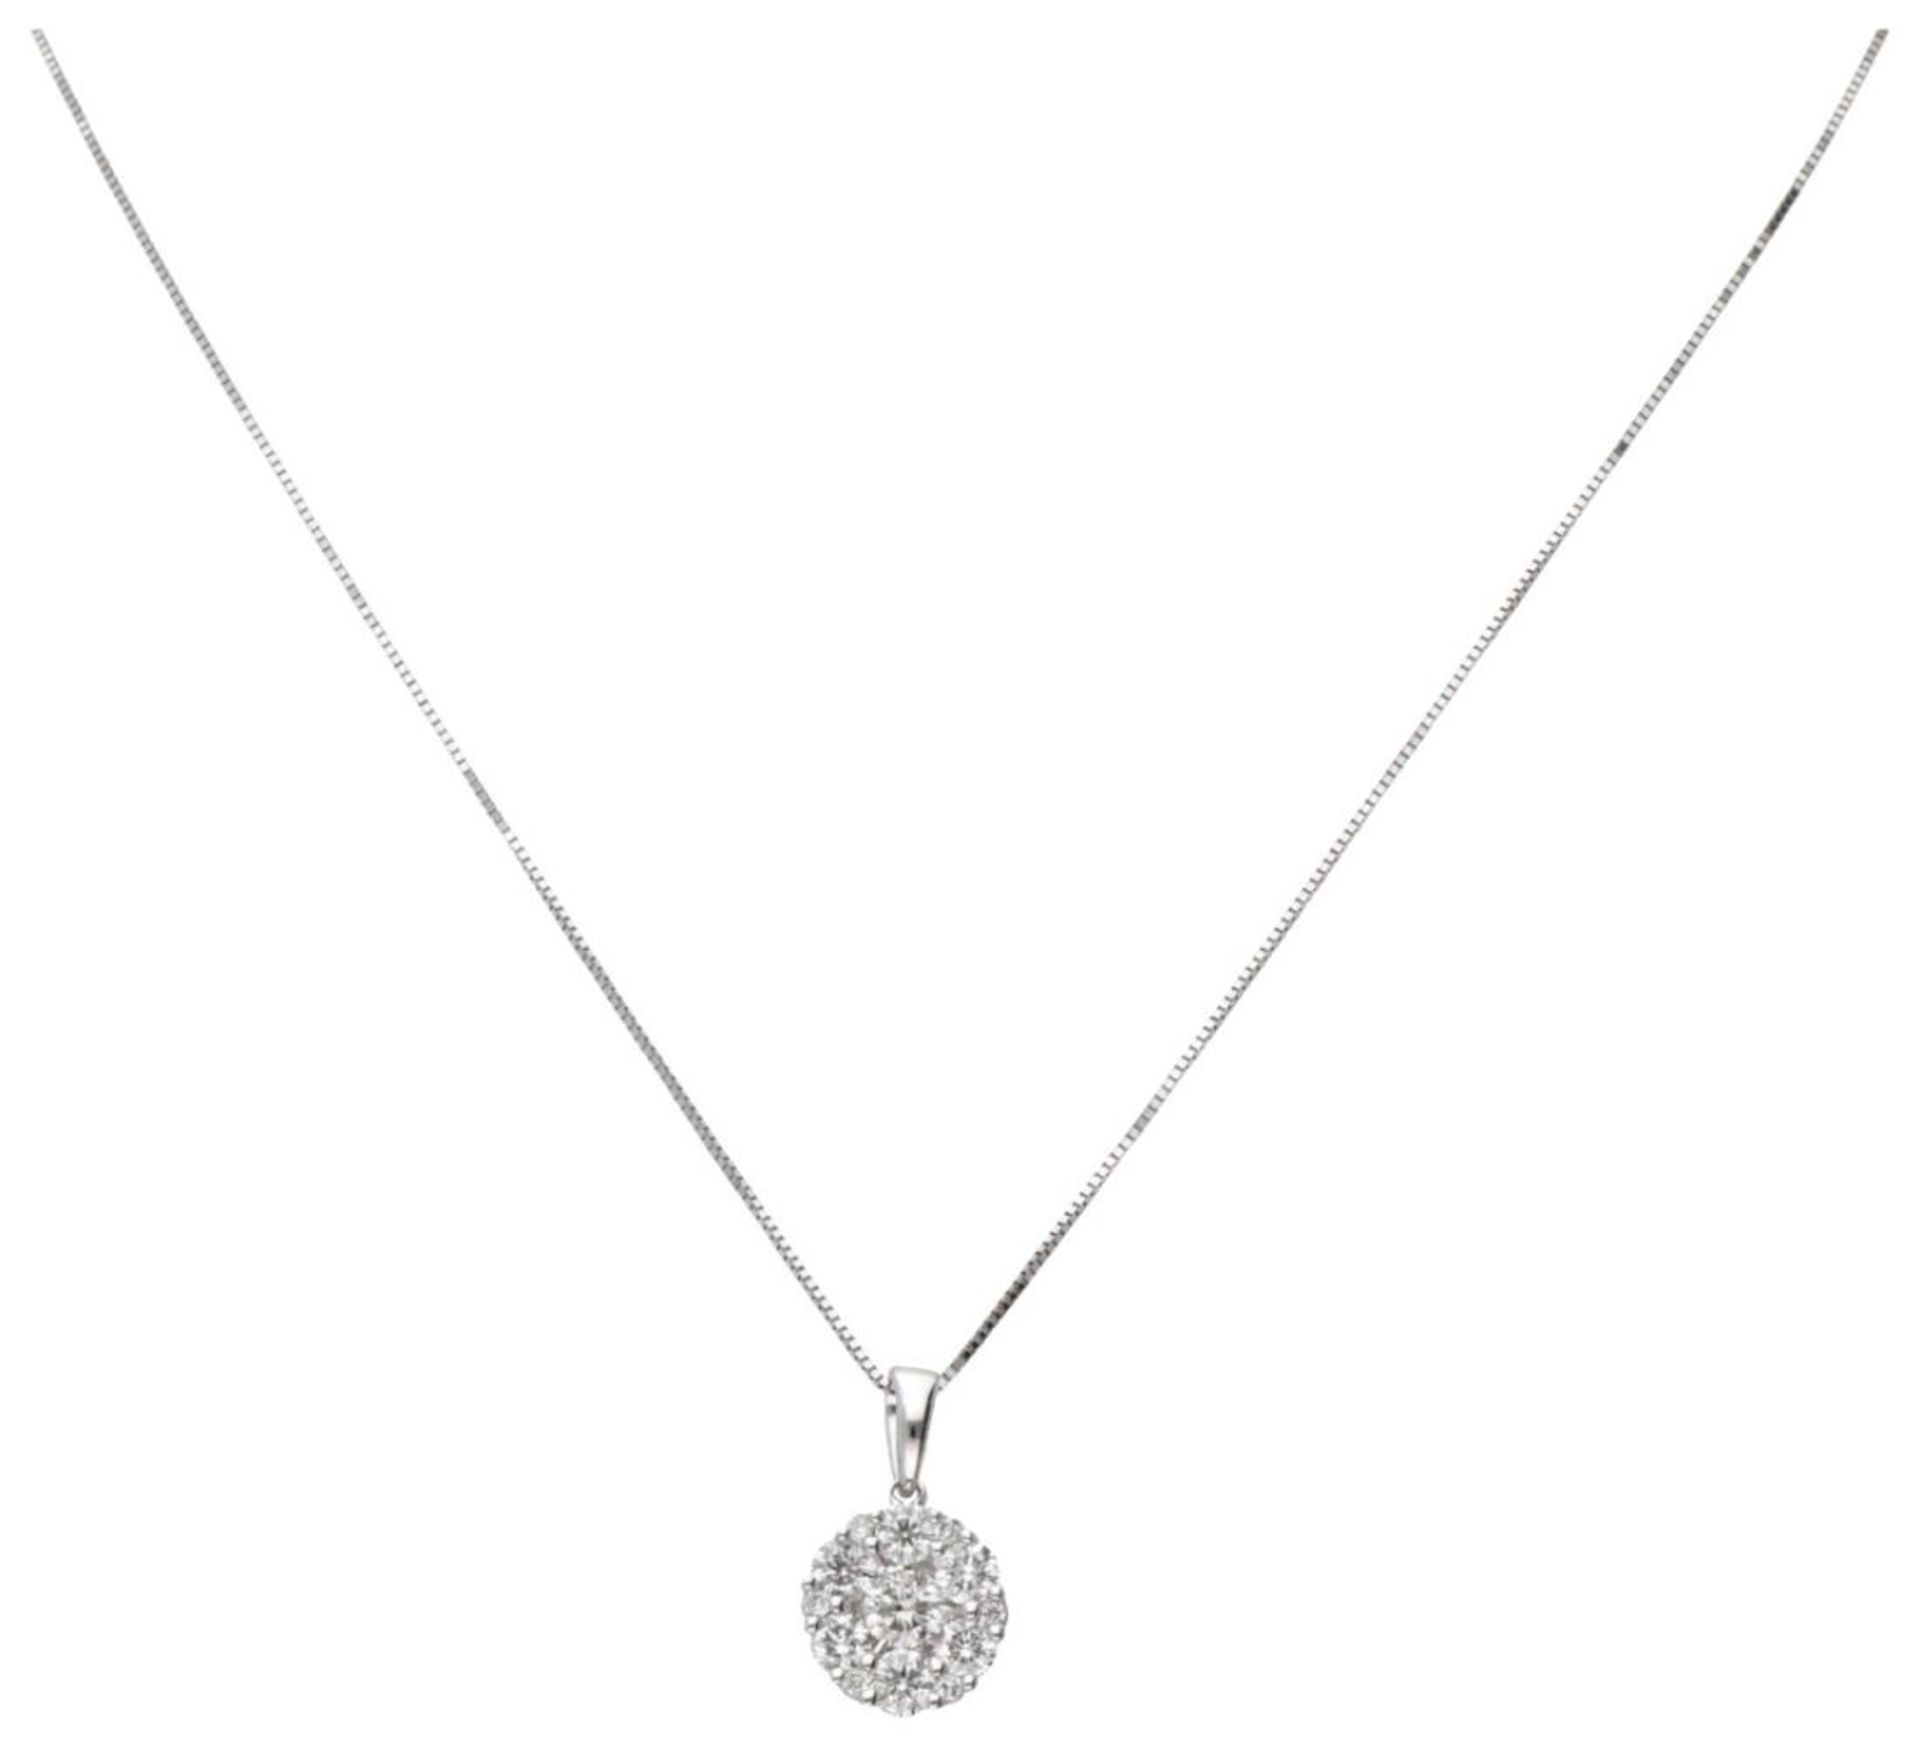 14K. White gold necklace with cluster pendant set with approx. 0.50 ct. diamond.